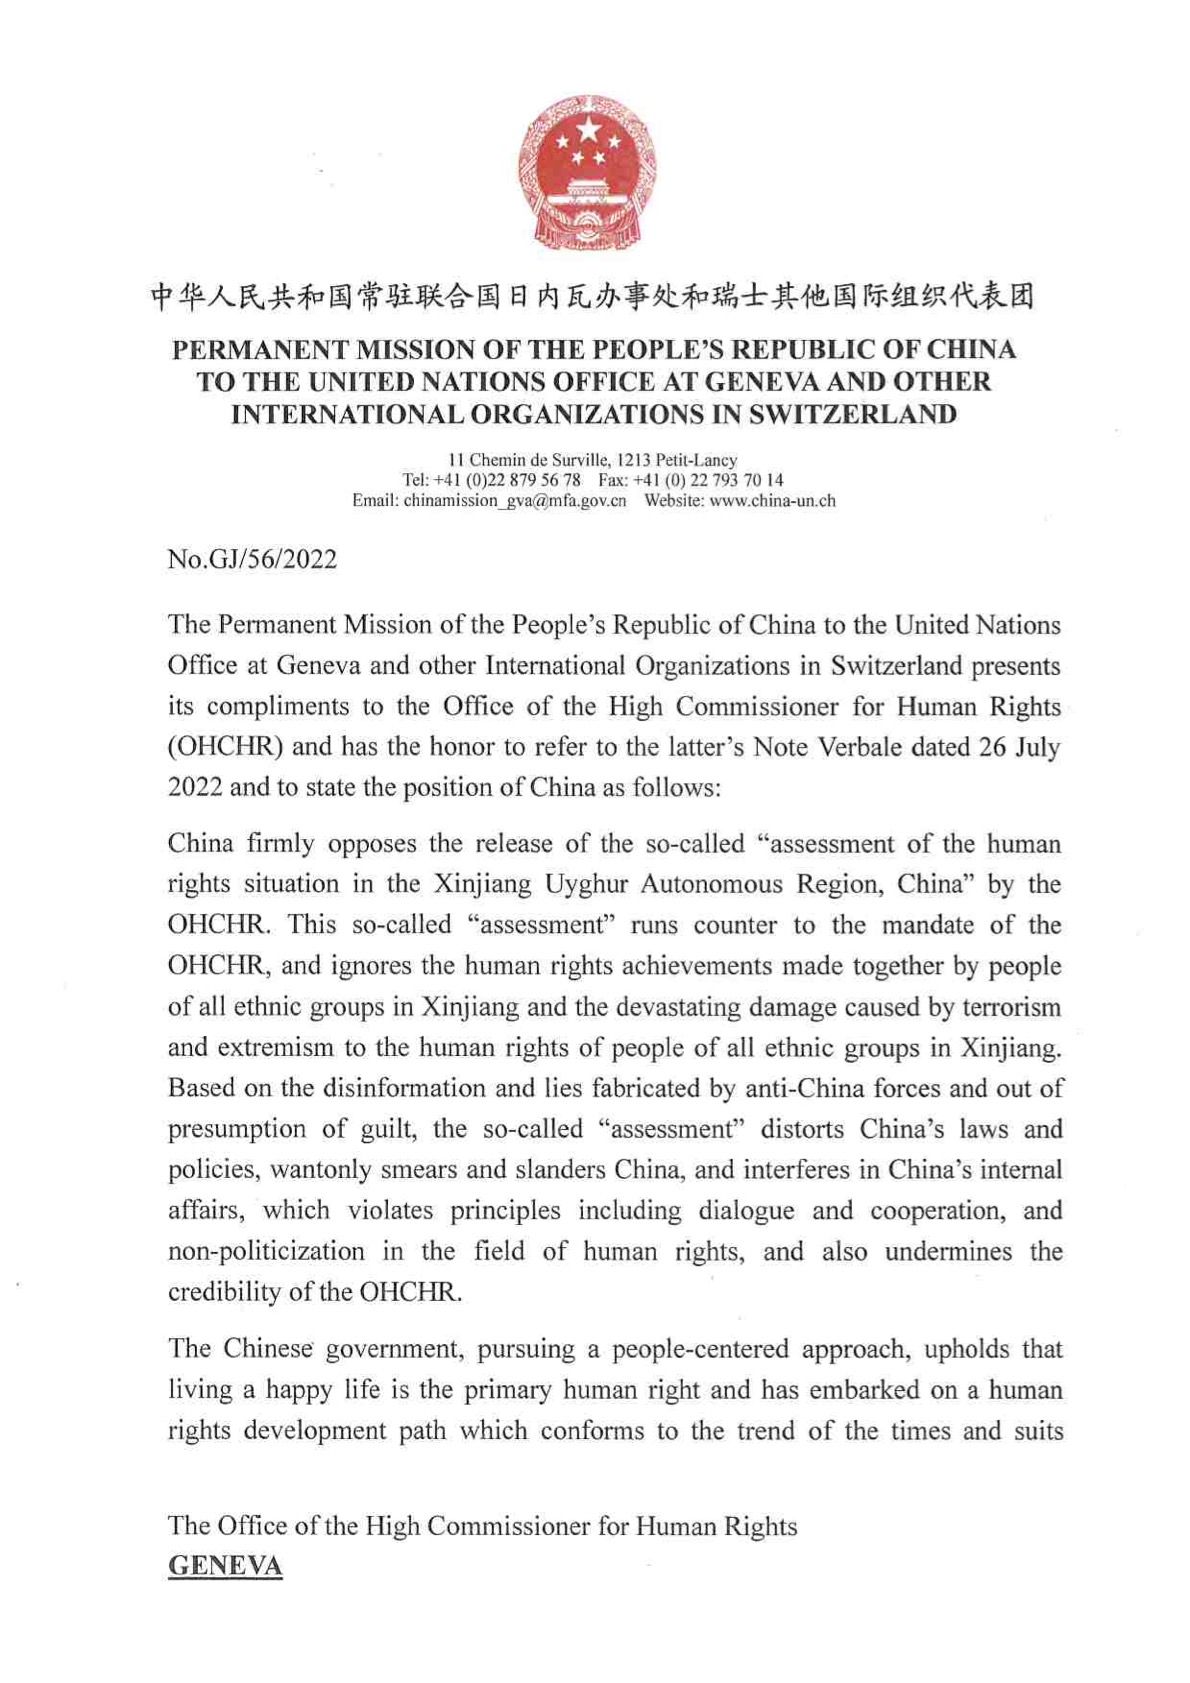 Note verbale on China's position on the "OHCHR Assessment of human rights concerns in the Xinjiang Uyghur Autonomous Region, People’s Republic of China"